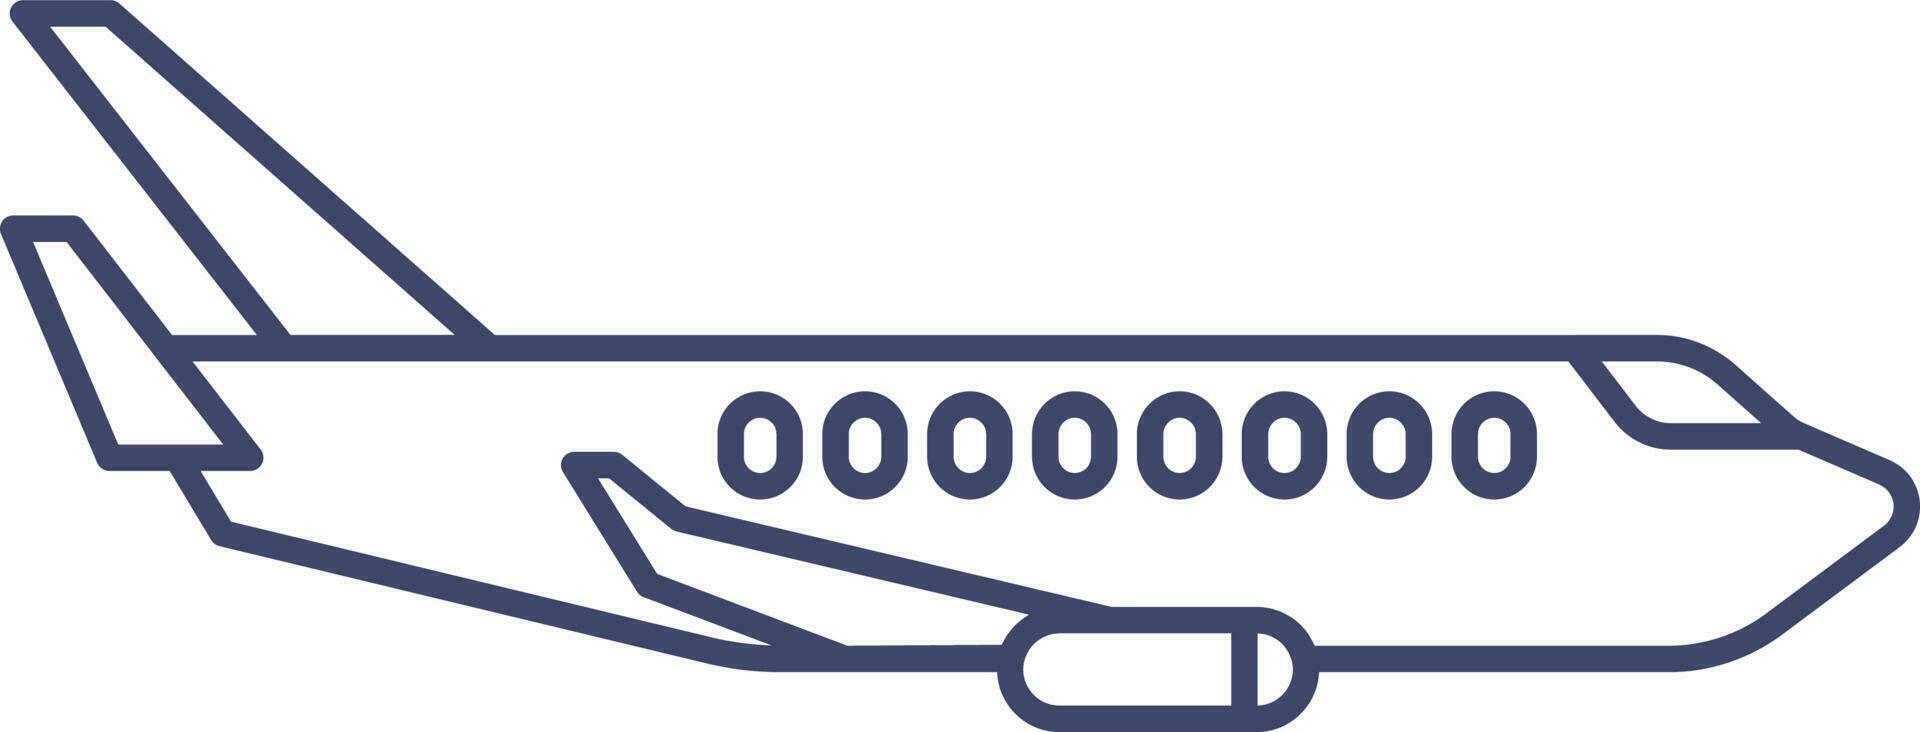 Airplane Icon In Blue Line Art. vector